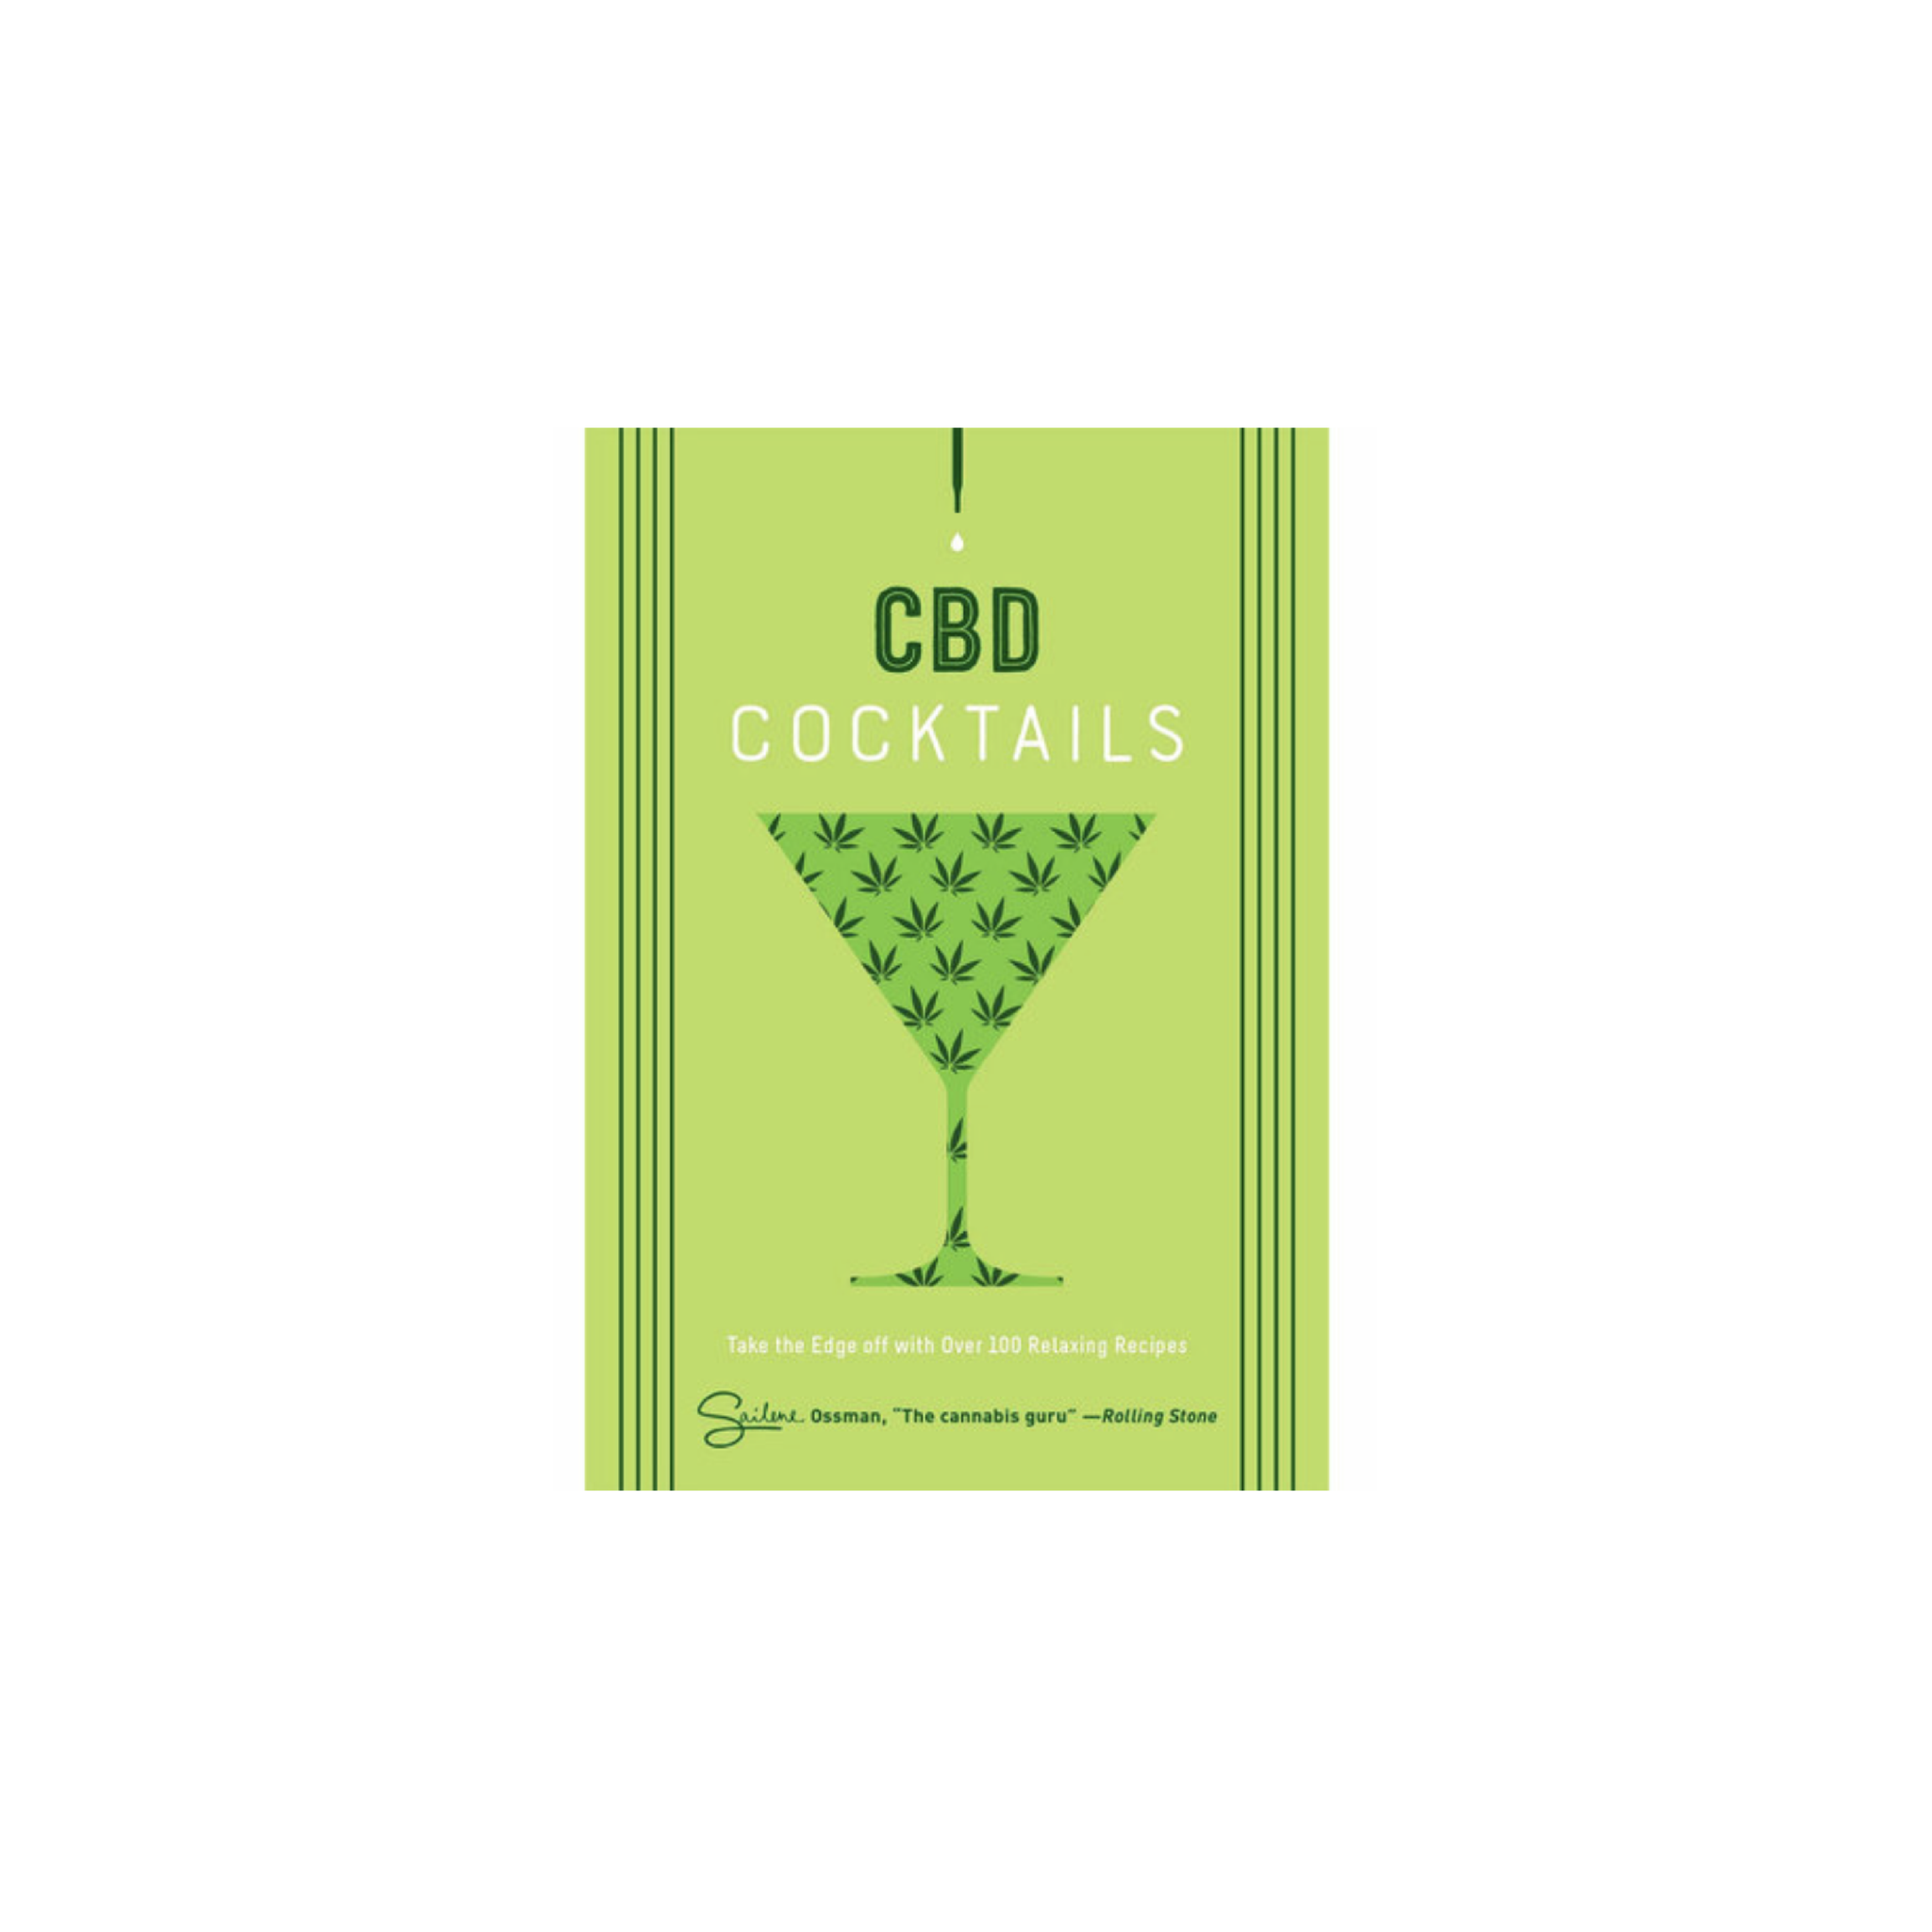 CBD Cocktails: Over 100 Recipes to Take the Edge Off